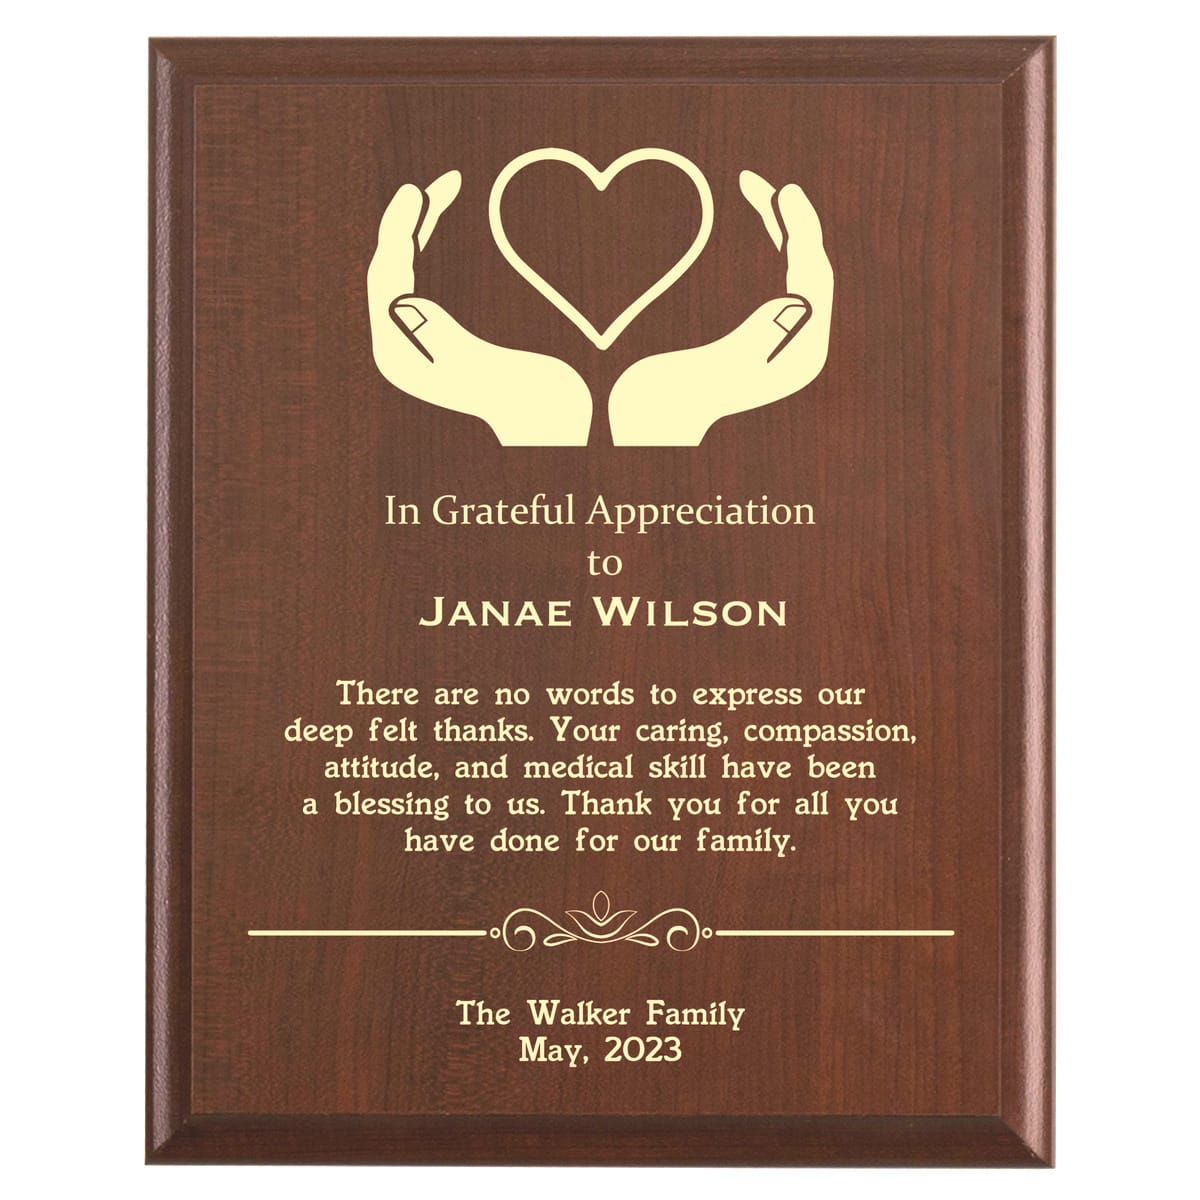 Plaque photo: Midwife Thank You Appreciation Plaque design with free personalization. Wood style finish with customized text.